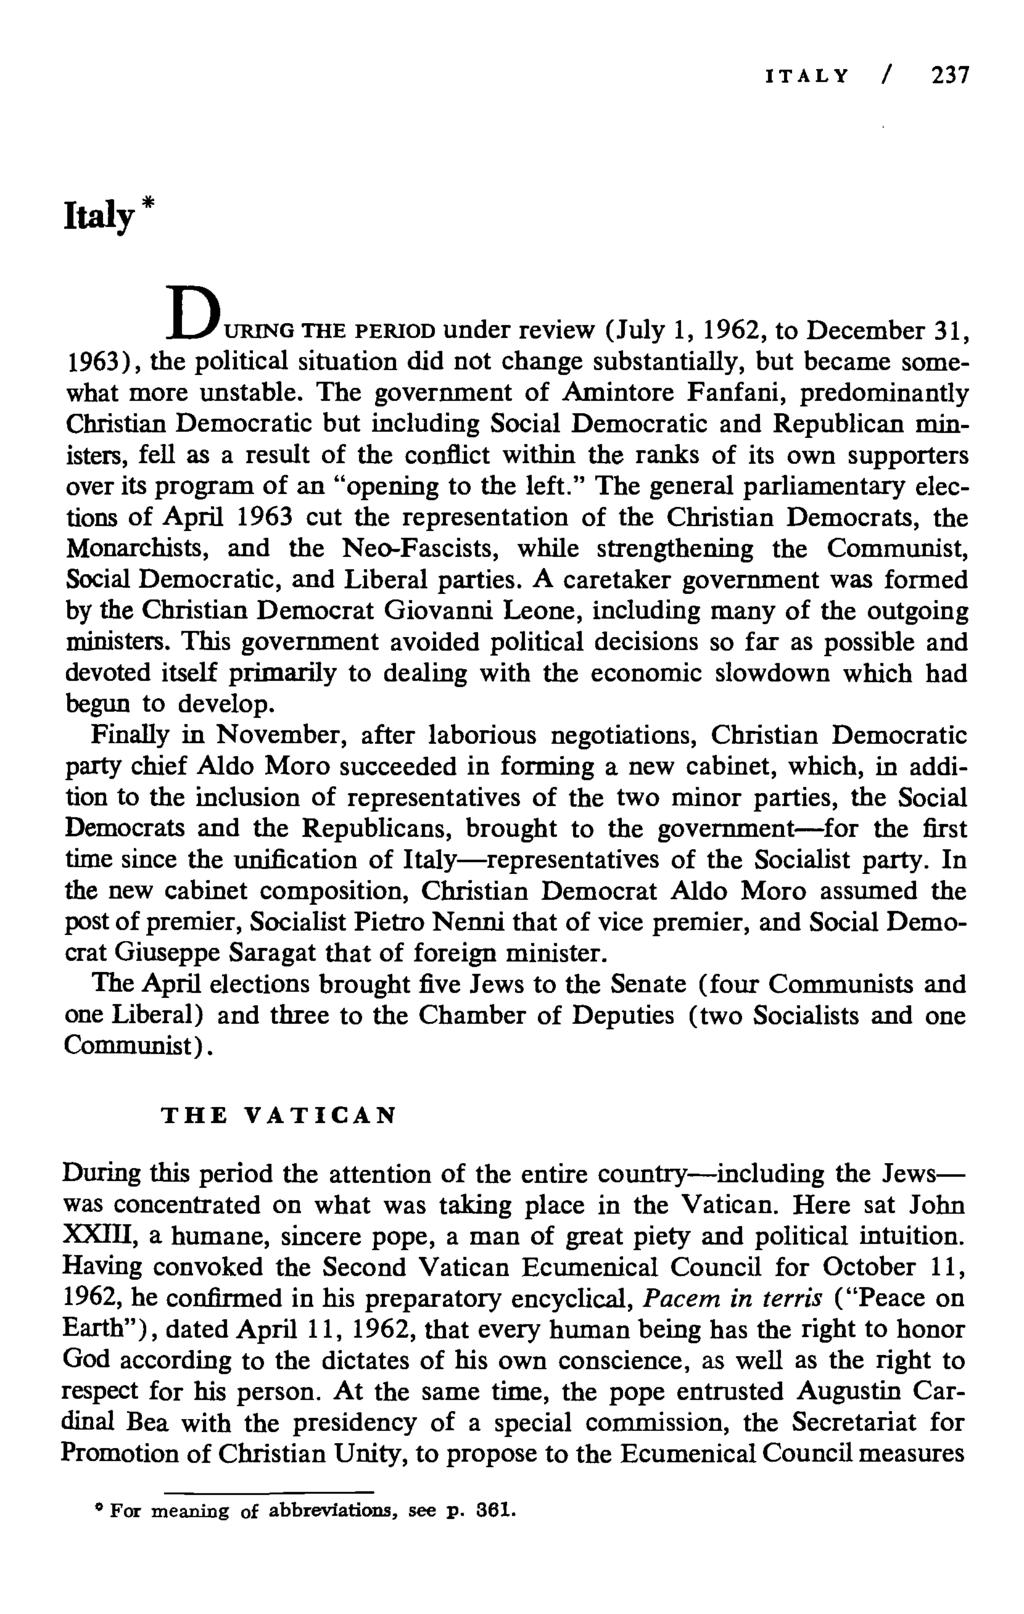 ITALY / 237 Italy D, 'URTNG THE PERIOD under review (July 1, 1962, to December 31, 1963), the political situation did not change substantially, but became somewhat more unstable.